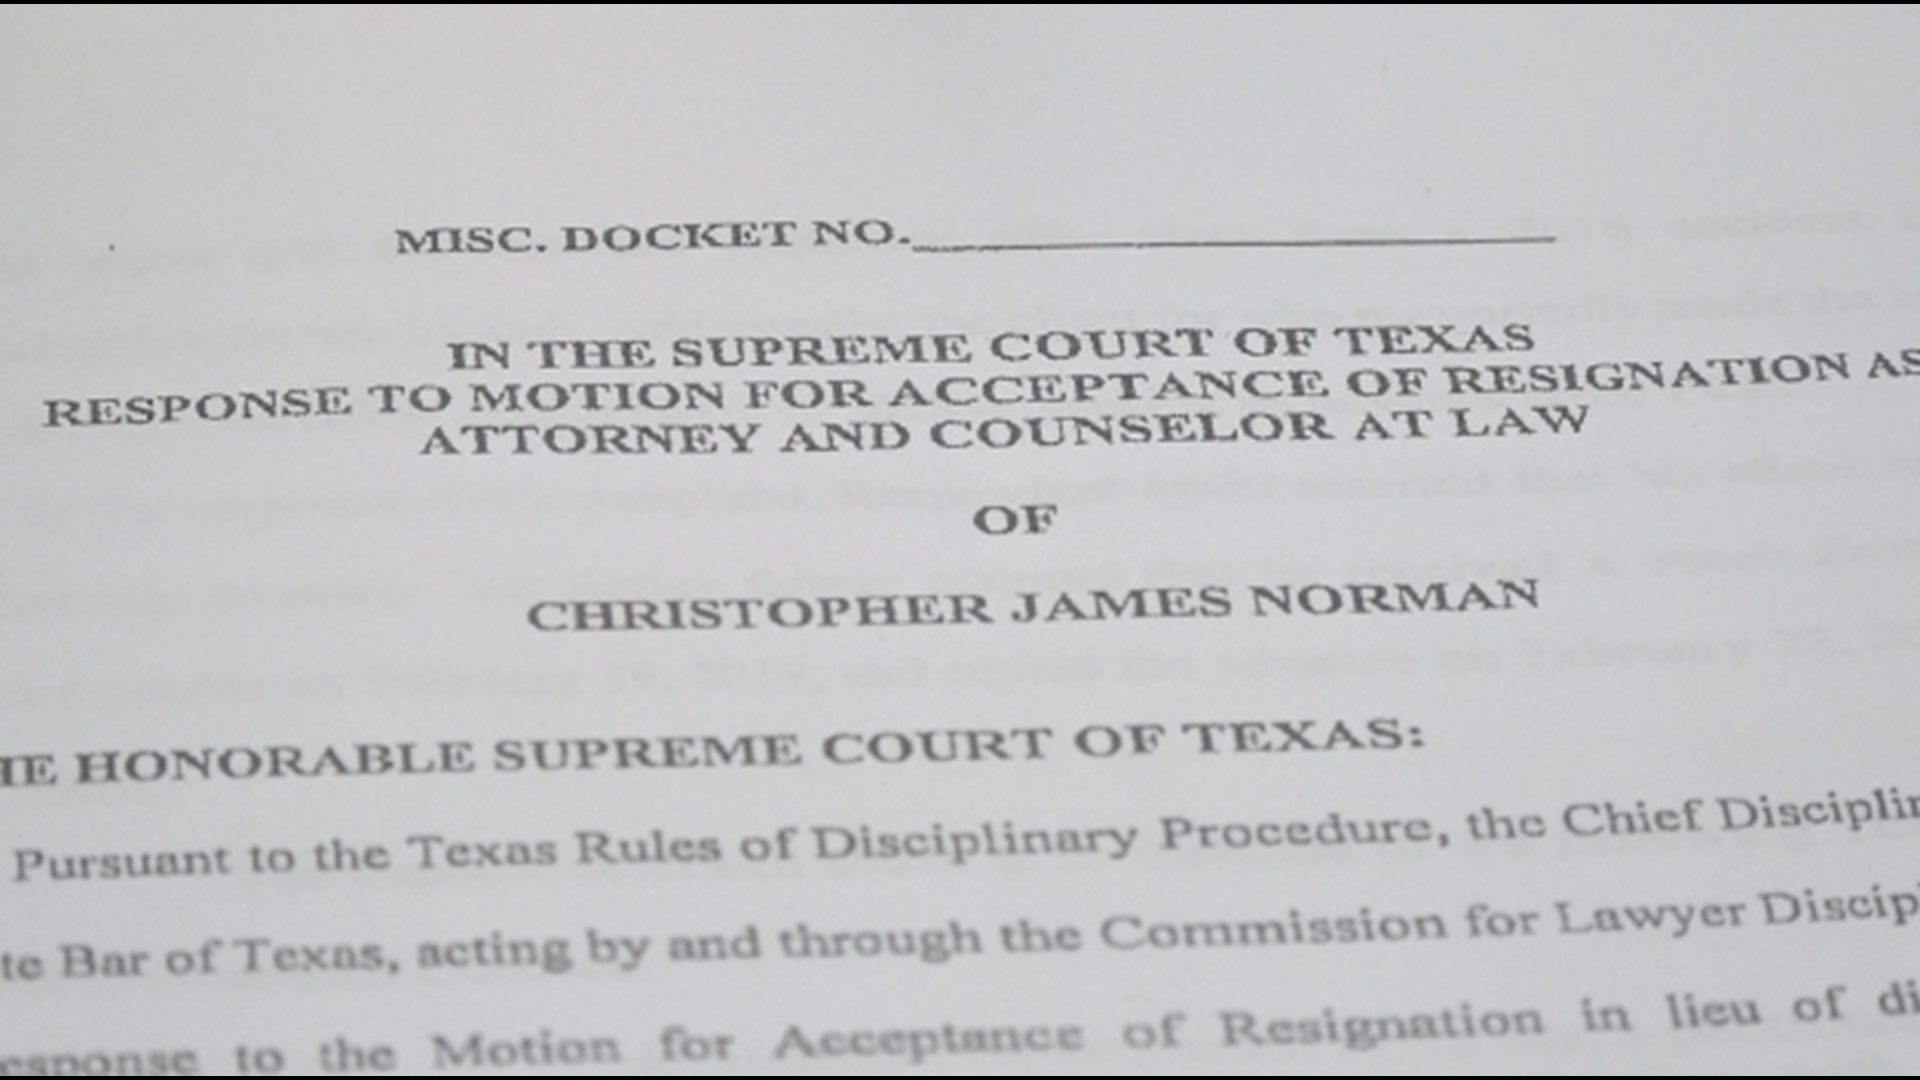 The Supreme Court of Texas said Chris Norman's resignation was in the best interest of the public, and his profession.